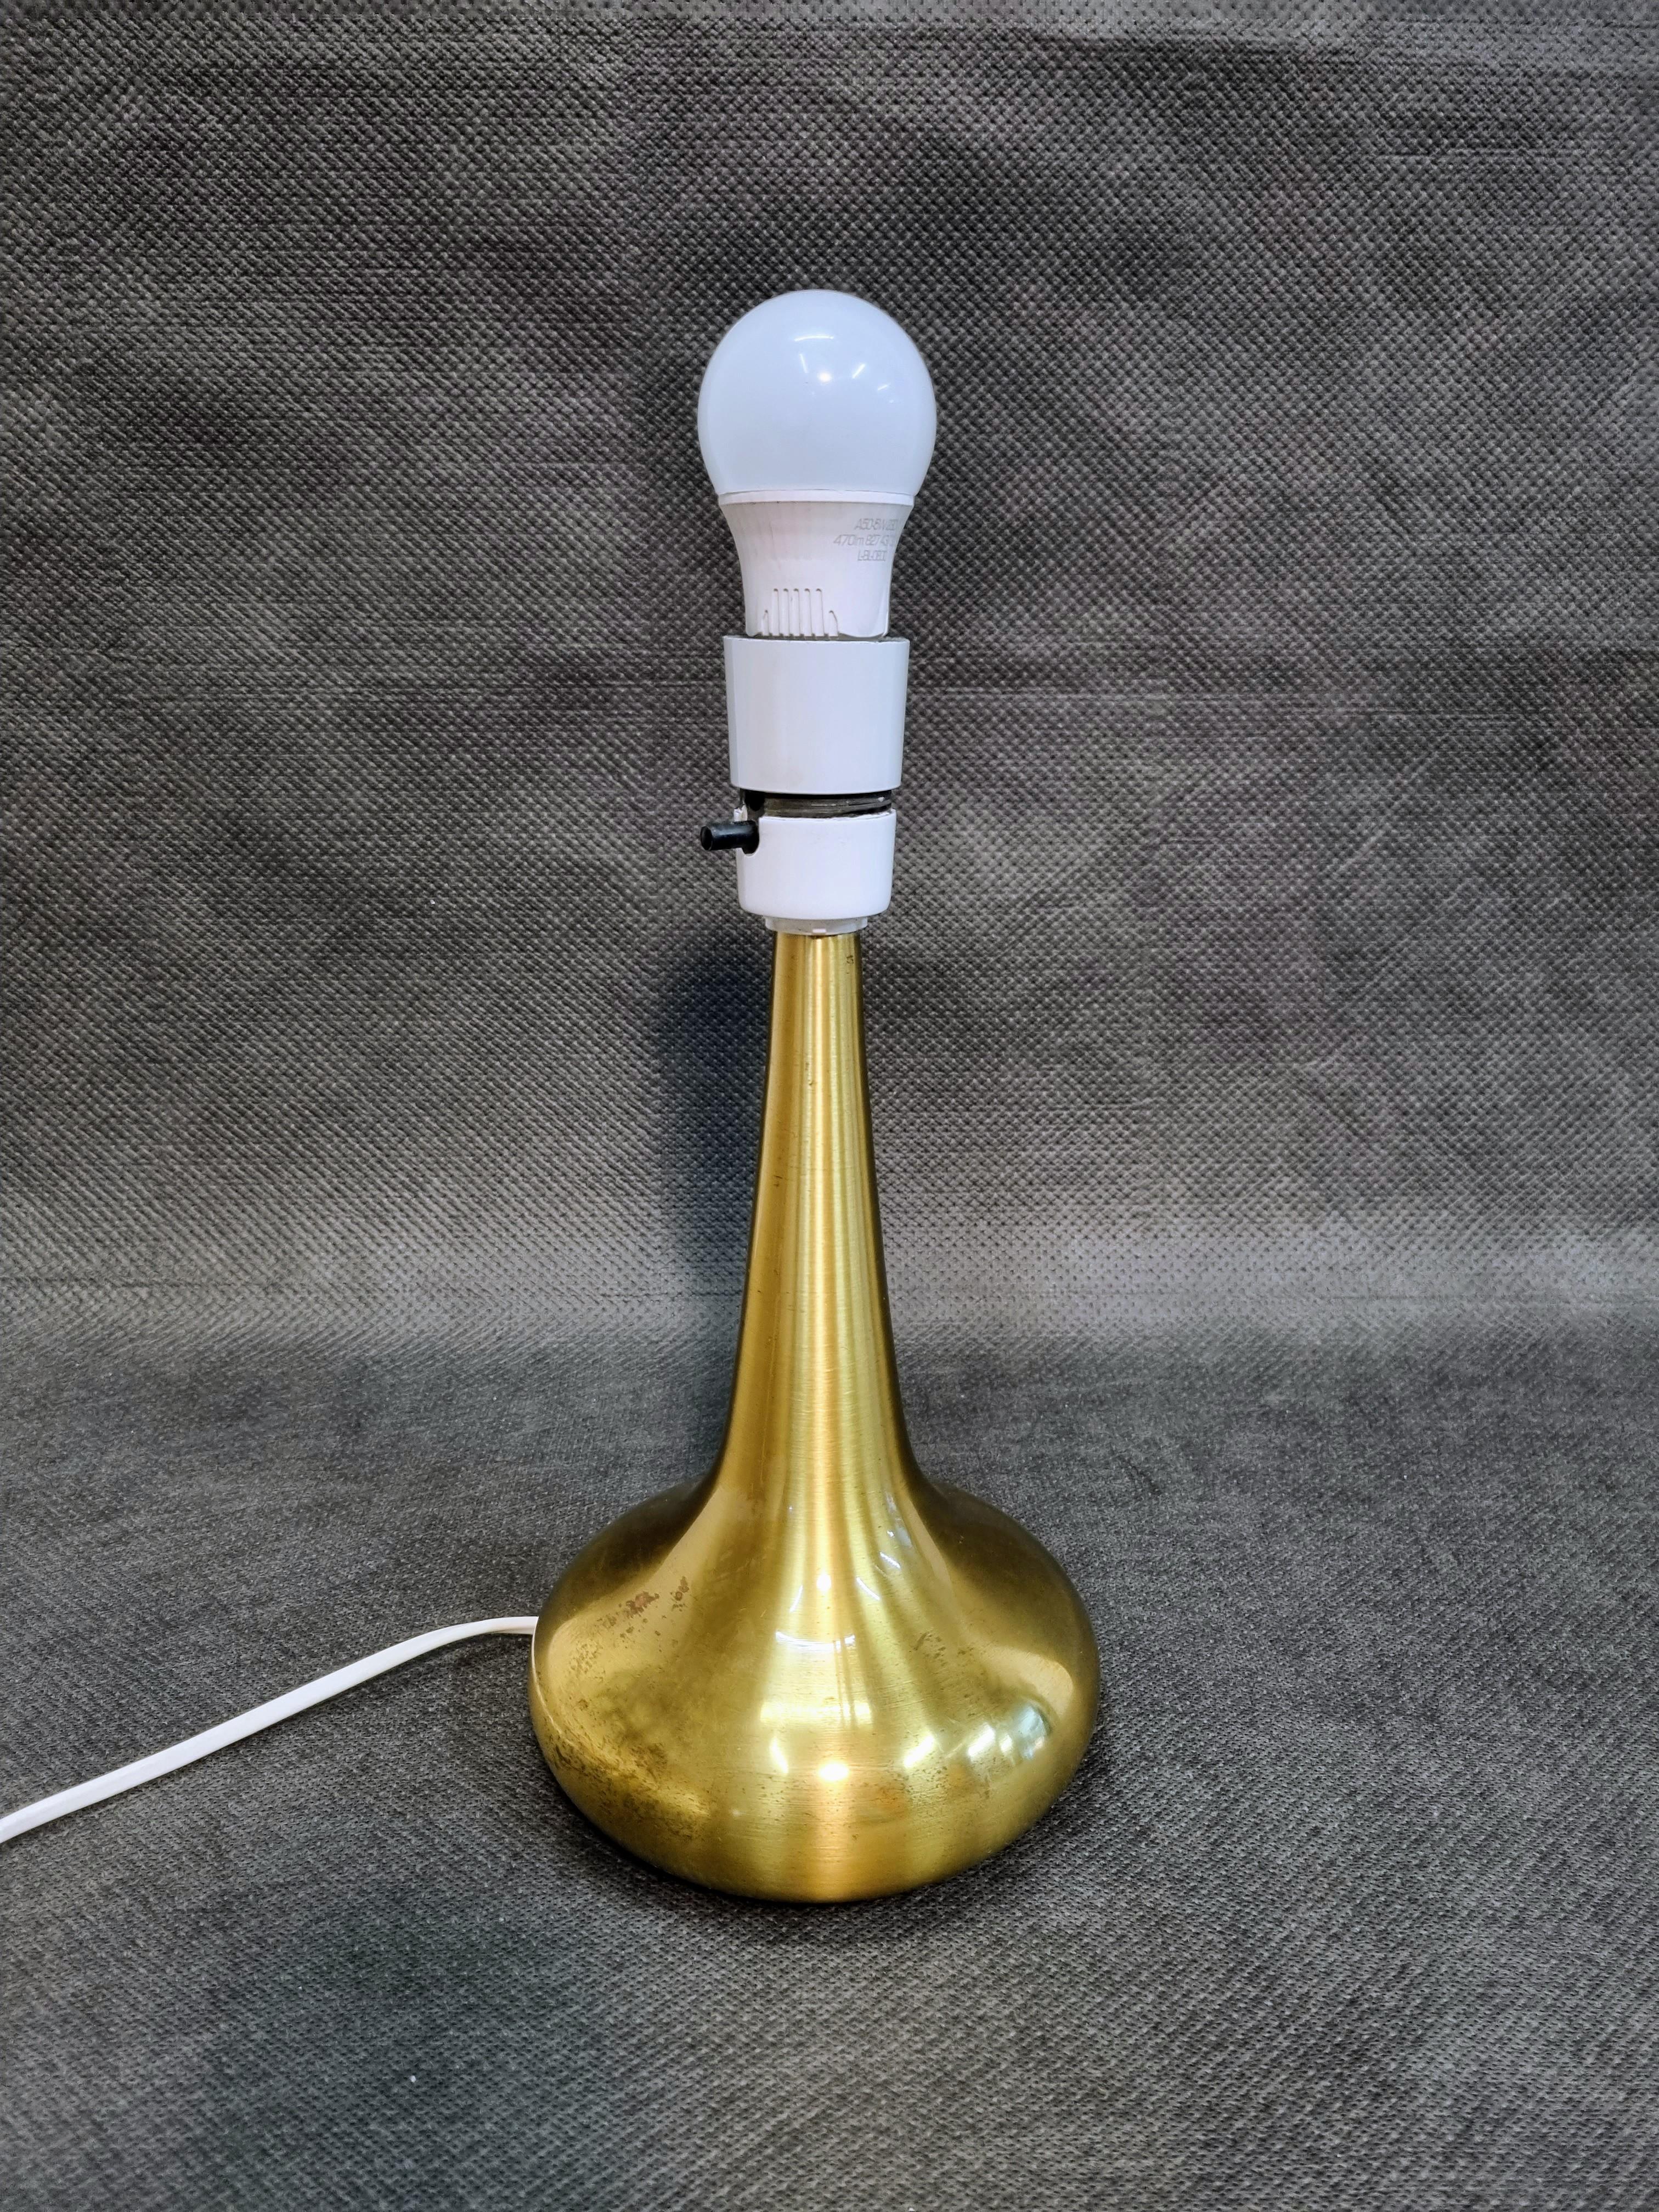 Brass table lamp, model Orient designed by Jo Hammerborg For Fog & Mørup in 1962. This is the small model, it is 28 cm high including socket, on and off button on the socket. This lamp is in good condition, although with a little patinated brass.